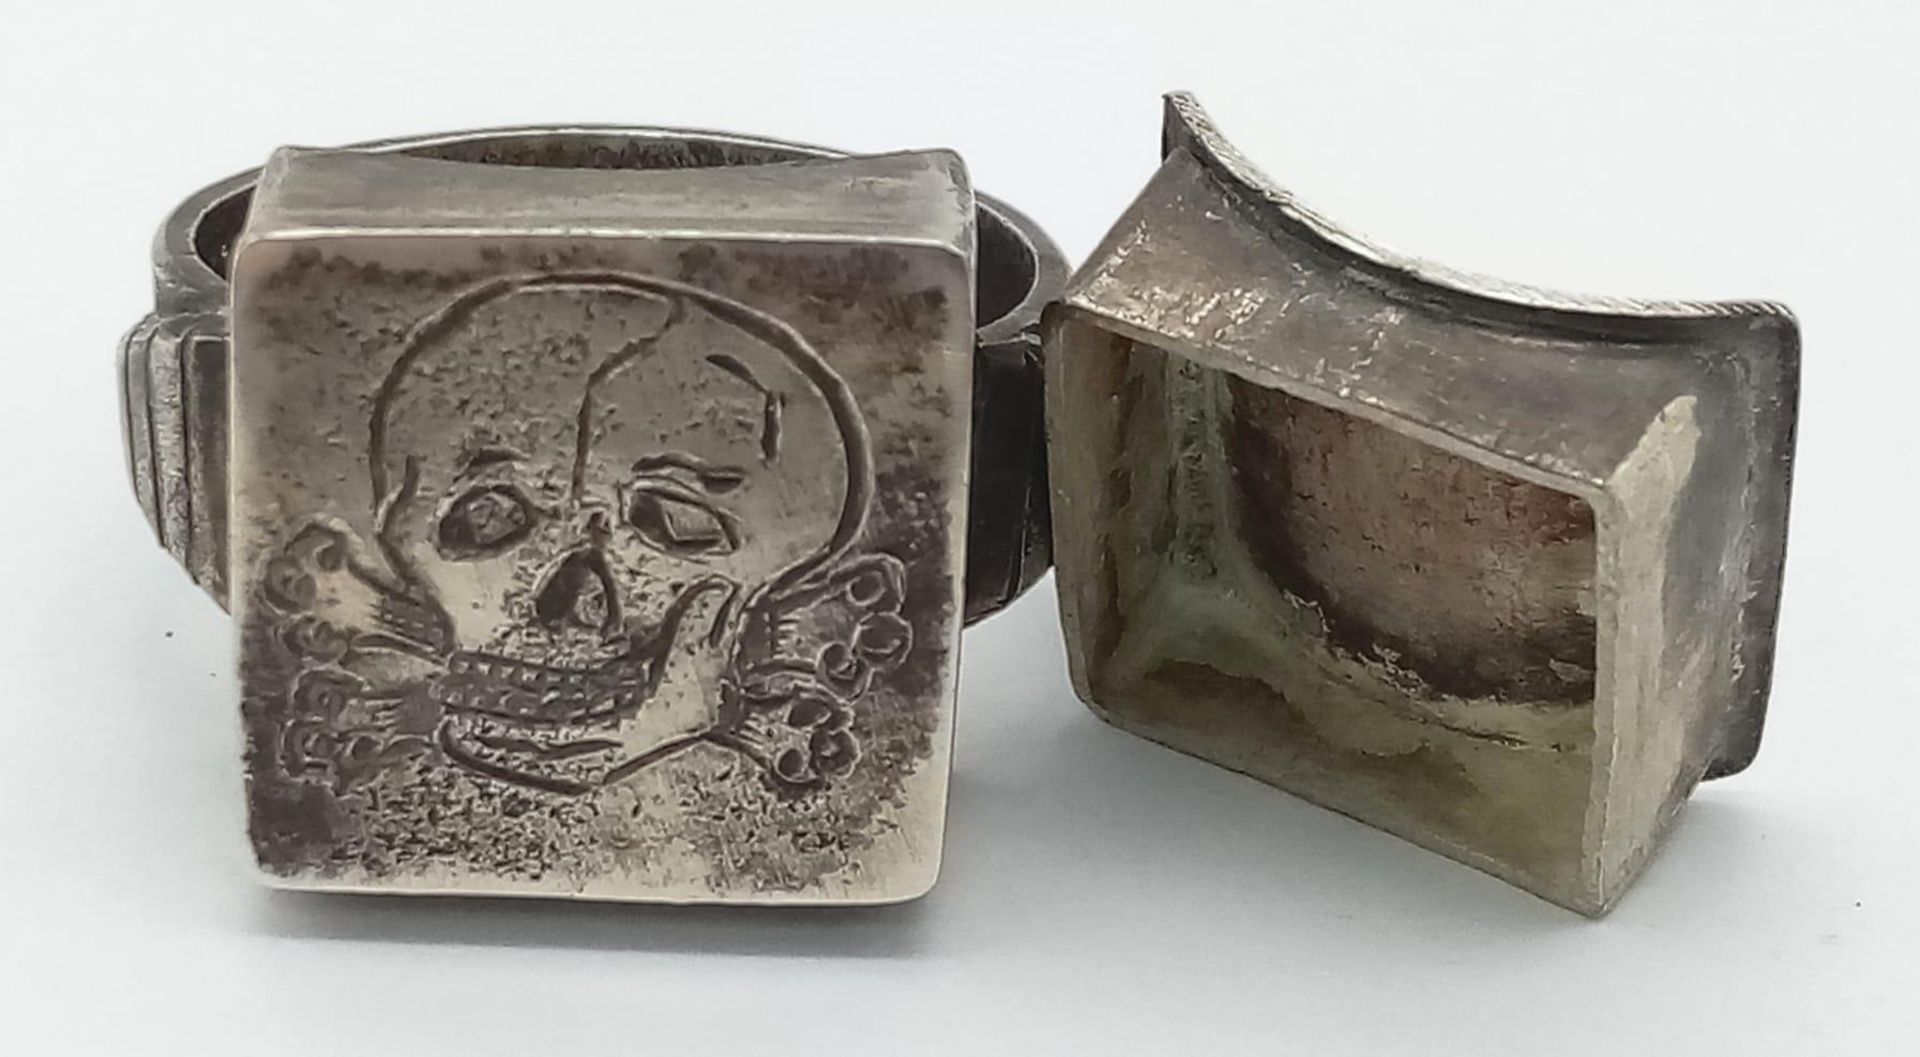 3rd Reich Waffen SS Totenkopf (Death’s Head) Division Bespoke Made Silver Ring with hidden